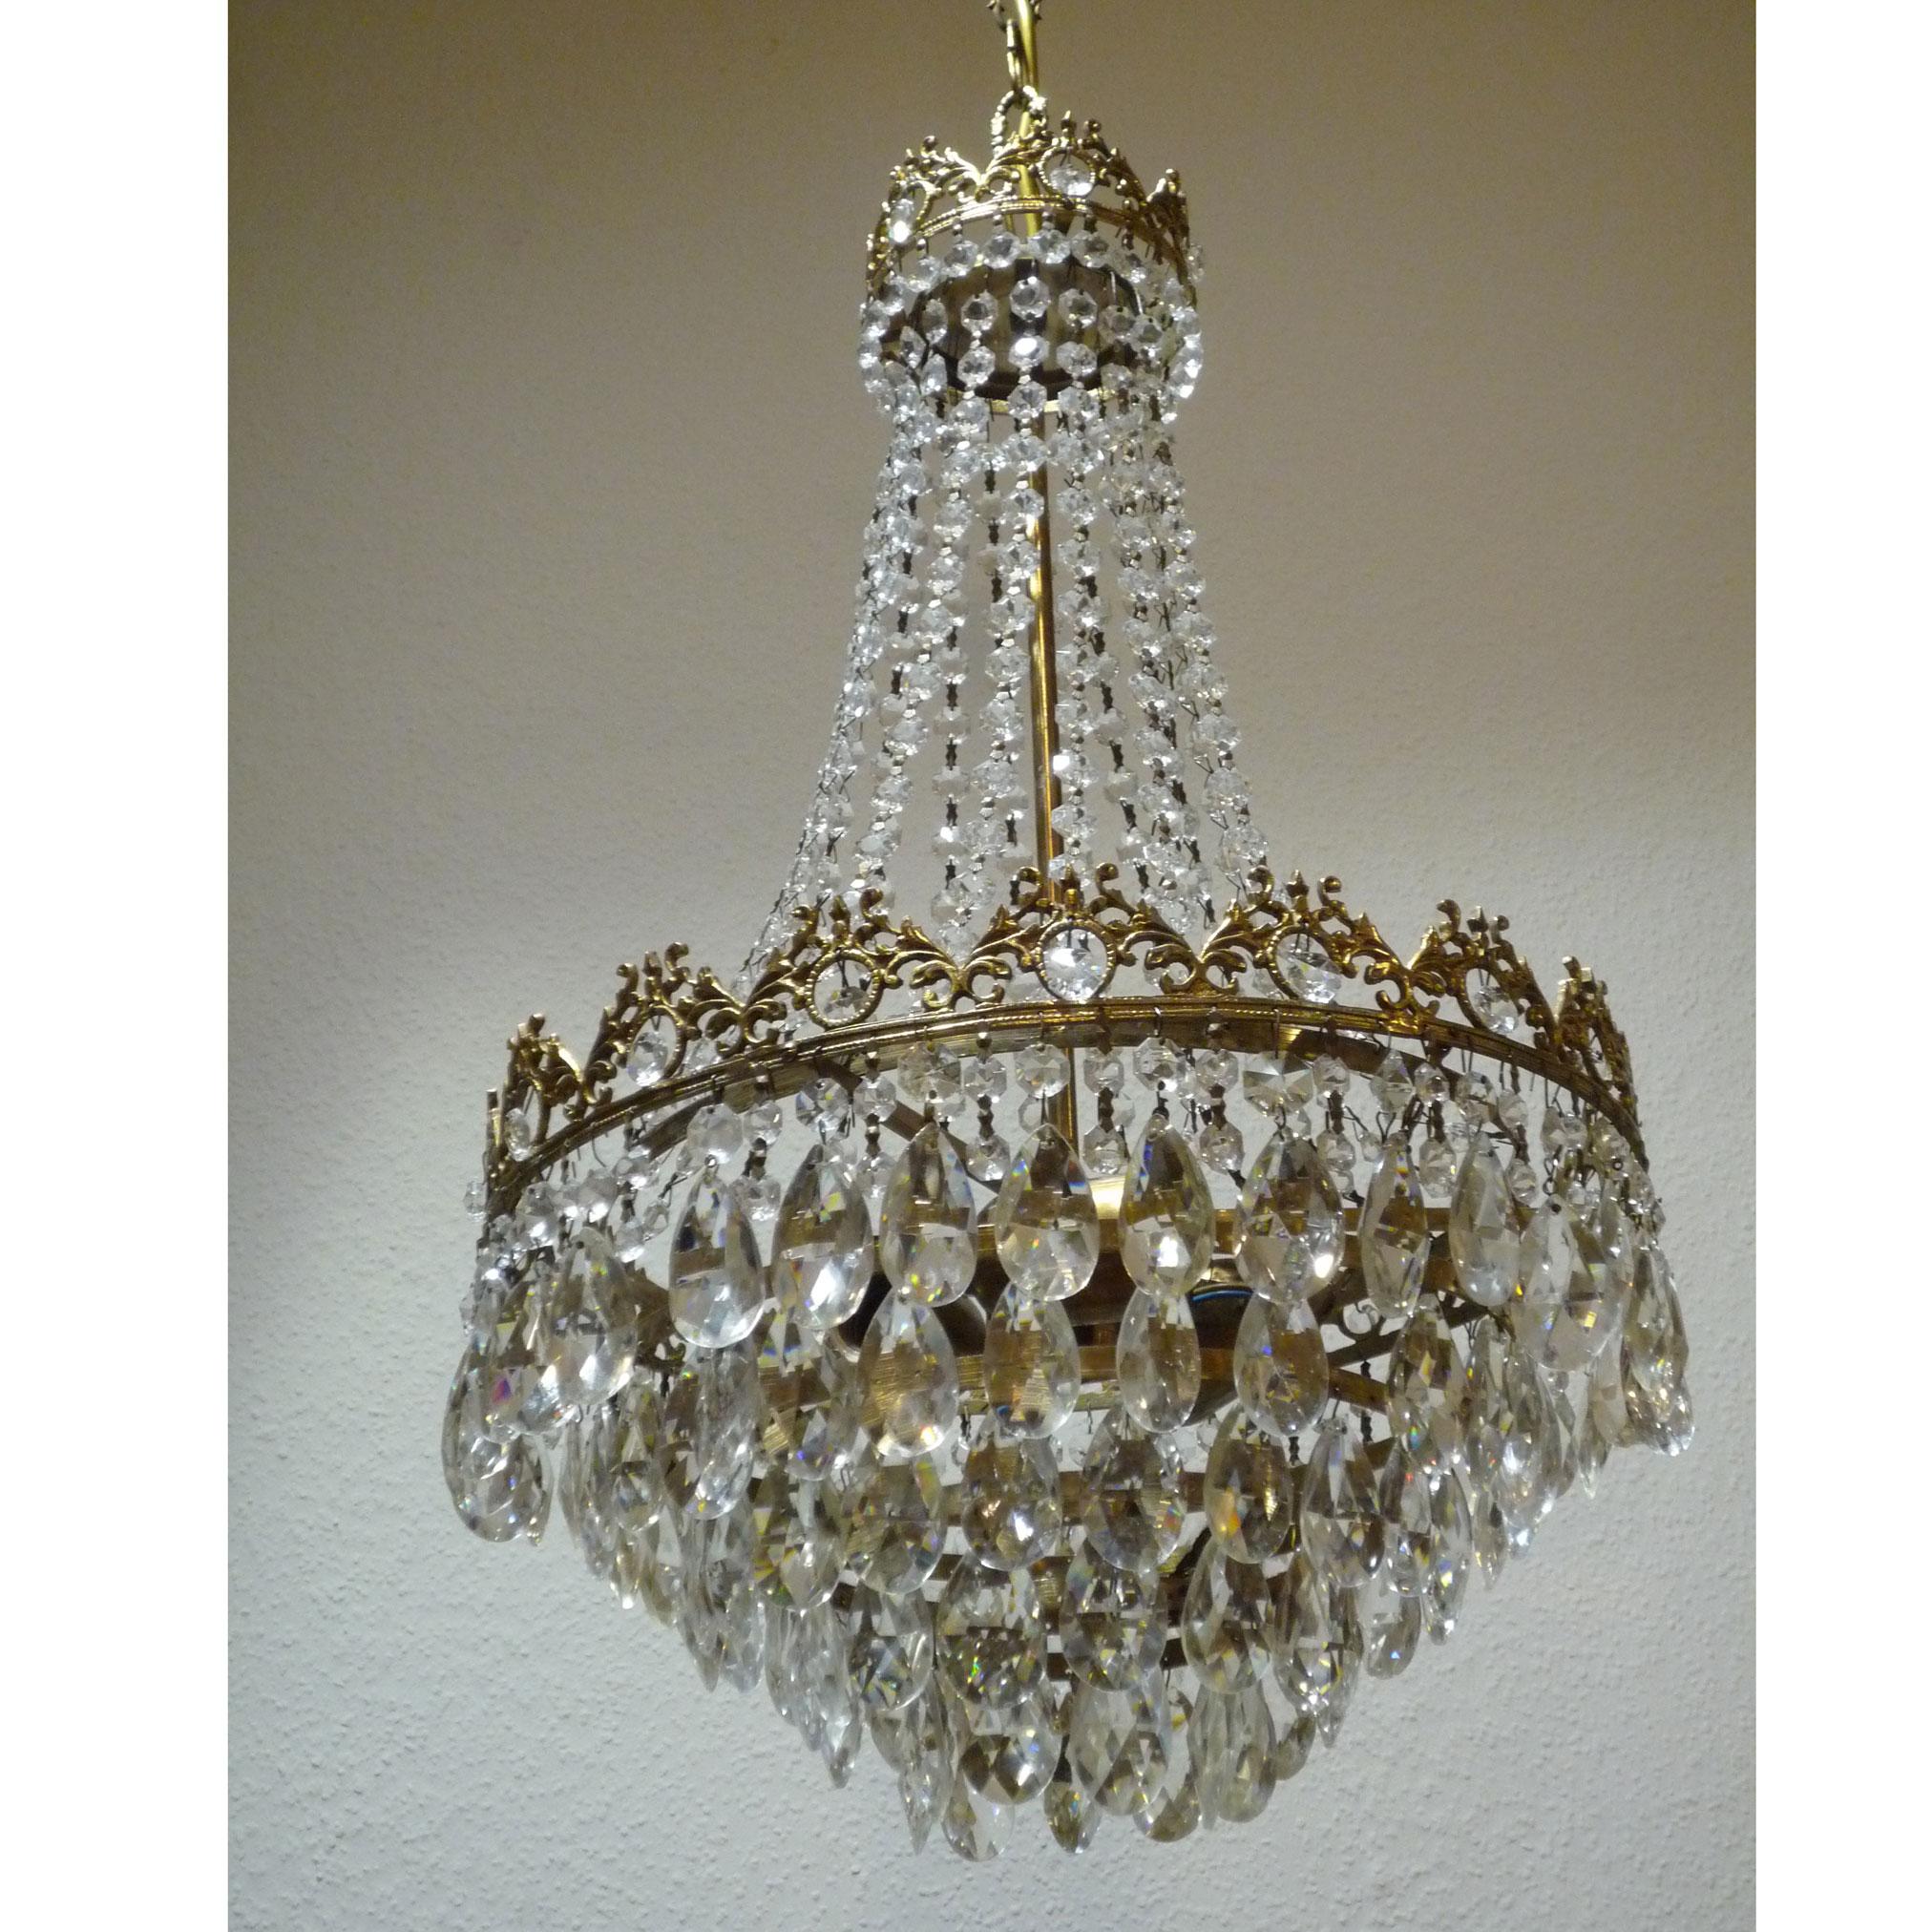 Small Crystal Chandelier, Bohemian Crystal (Messing)